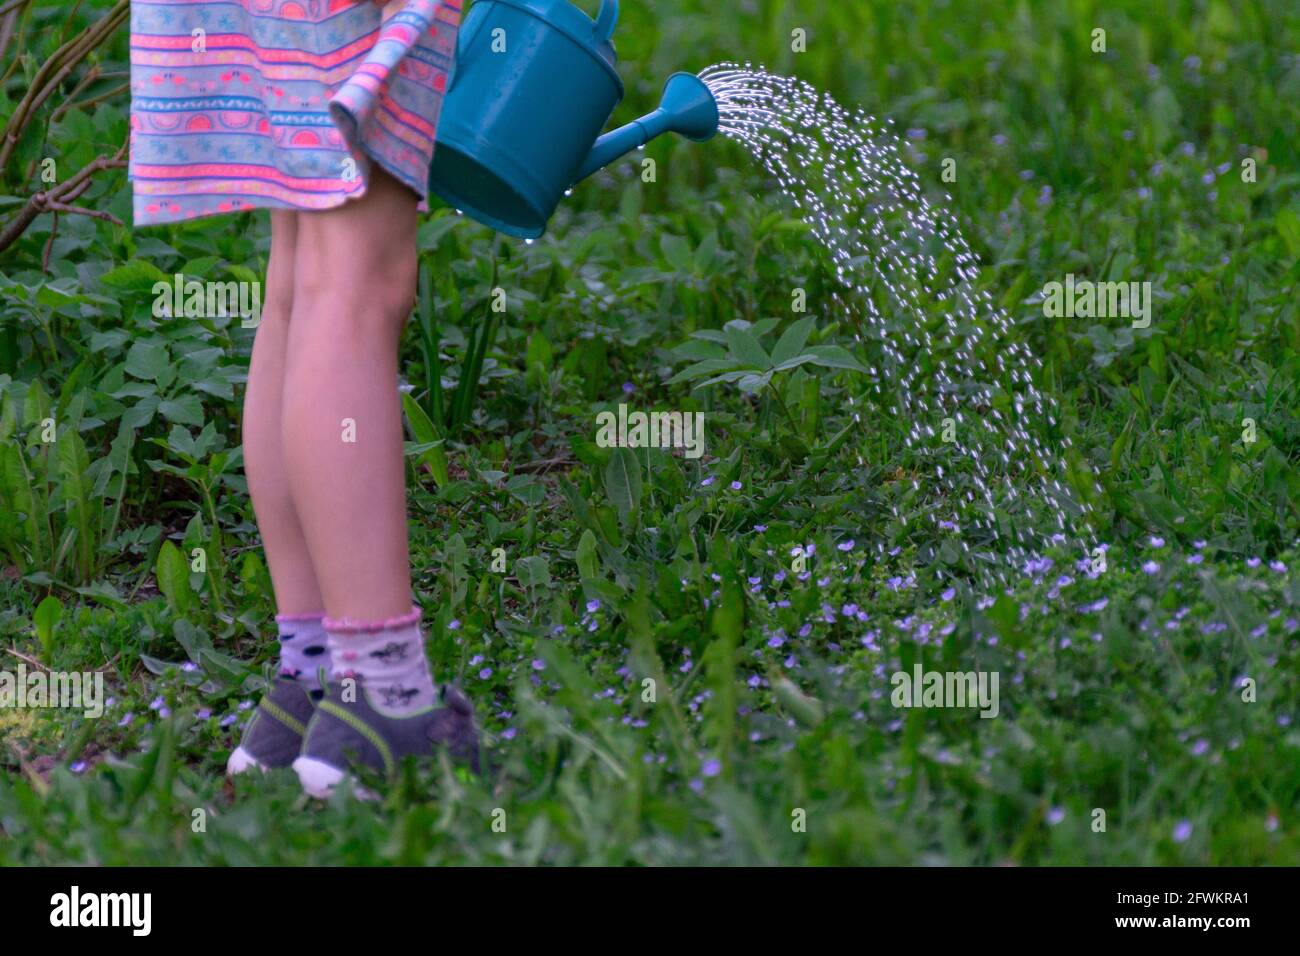 Child watering small flowers. Pink stripe skirt. Pink socks. Blue watering can. Stock Photo